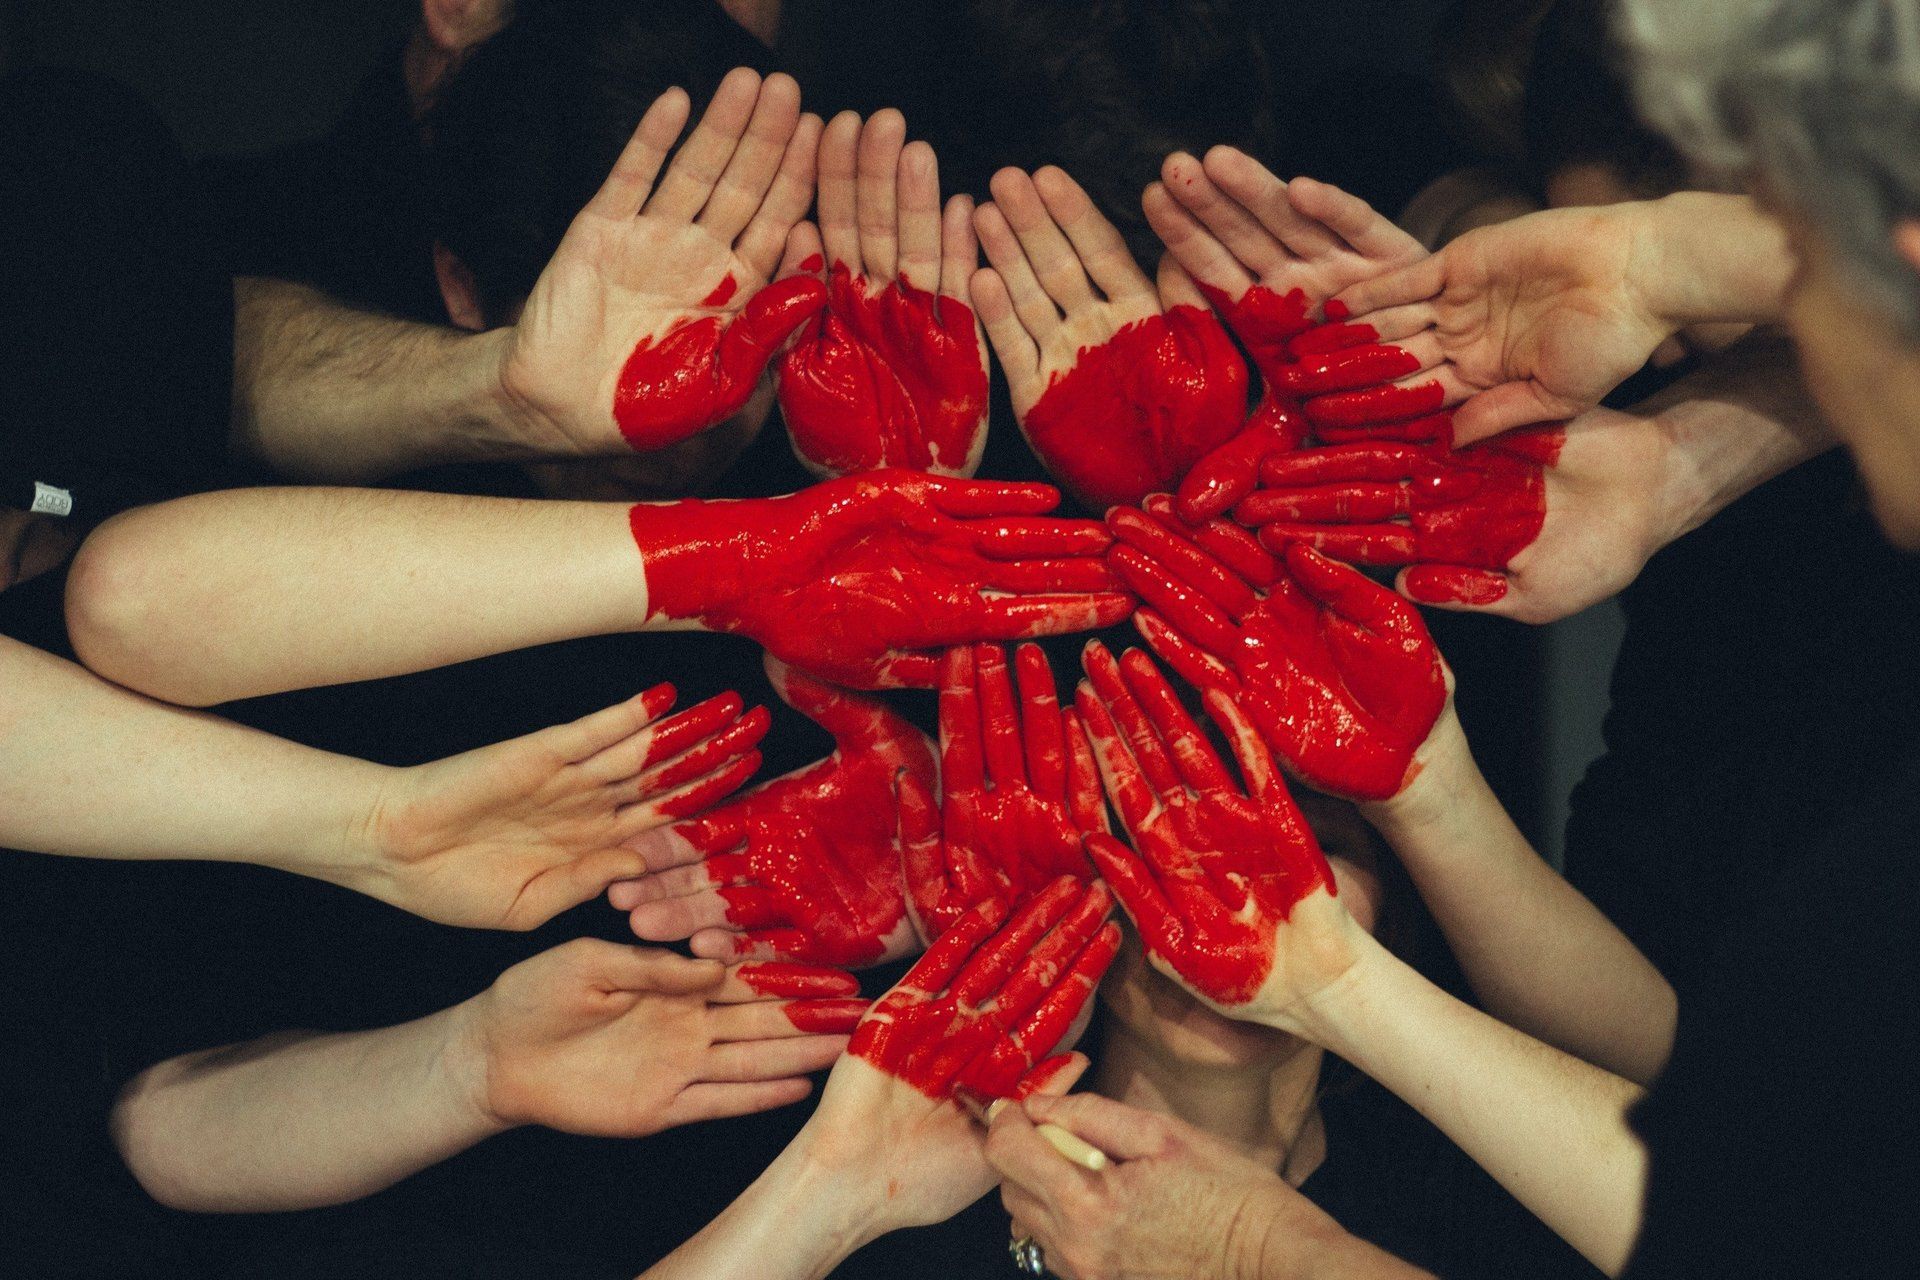 A group of people are making a heart with their hands painted red